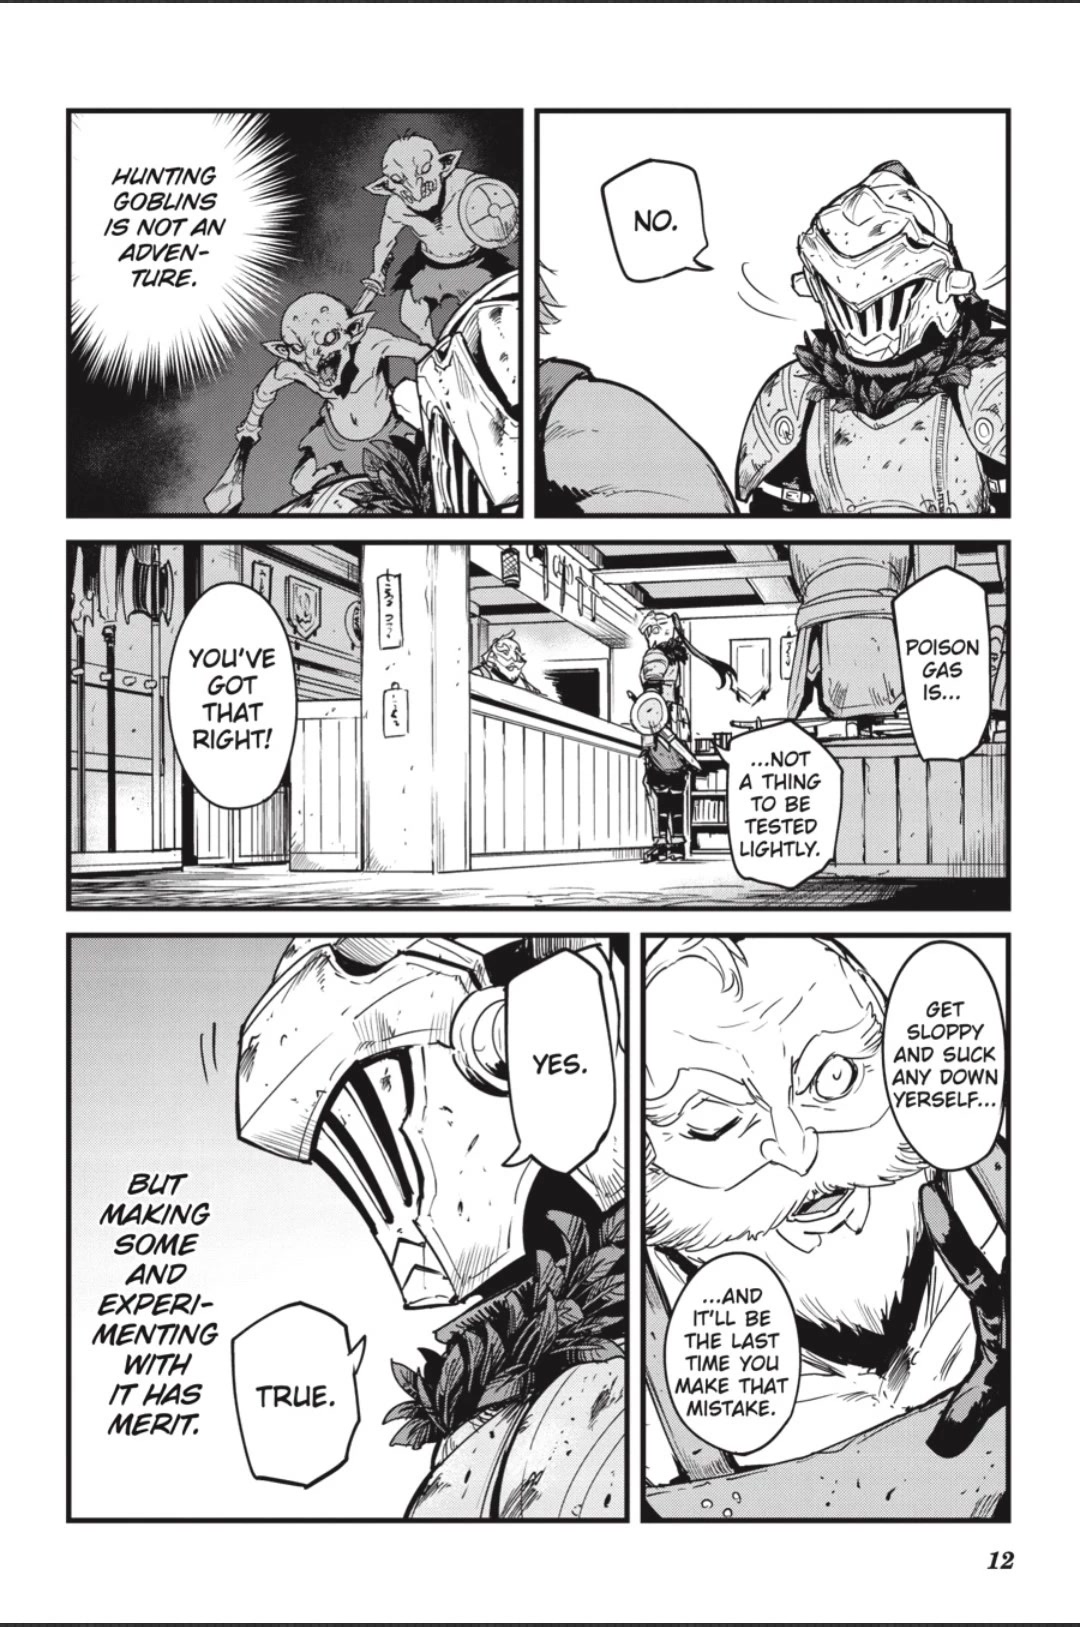 Goblin Slayer: Side Story Year One chapter 86